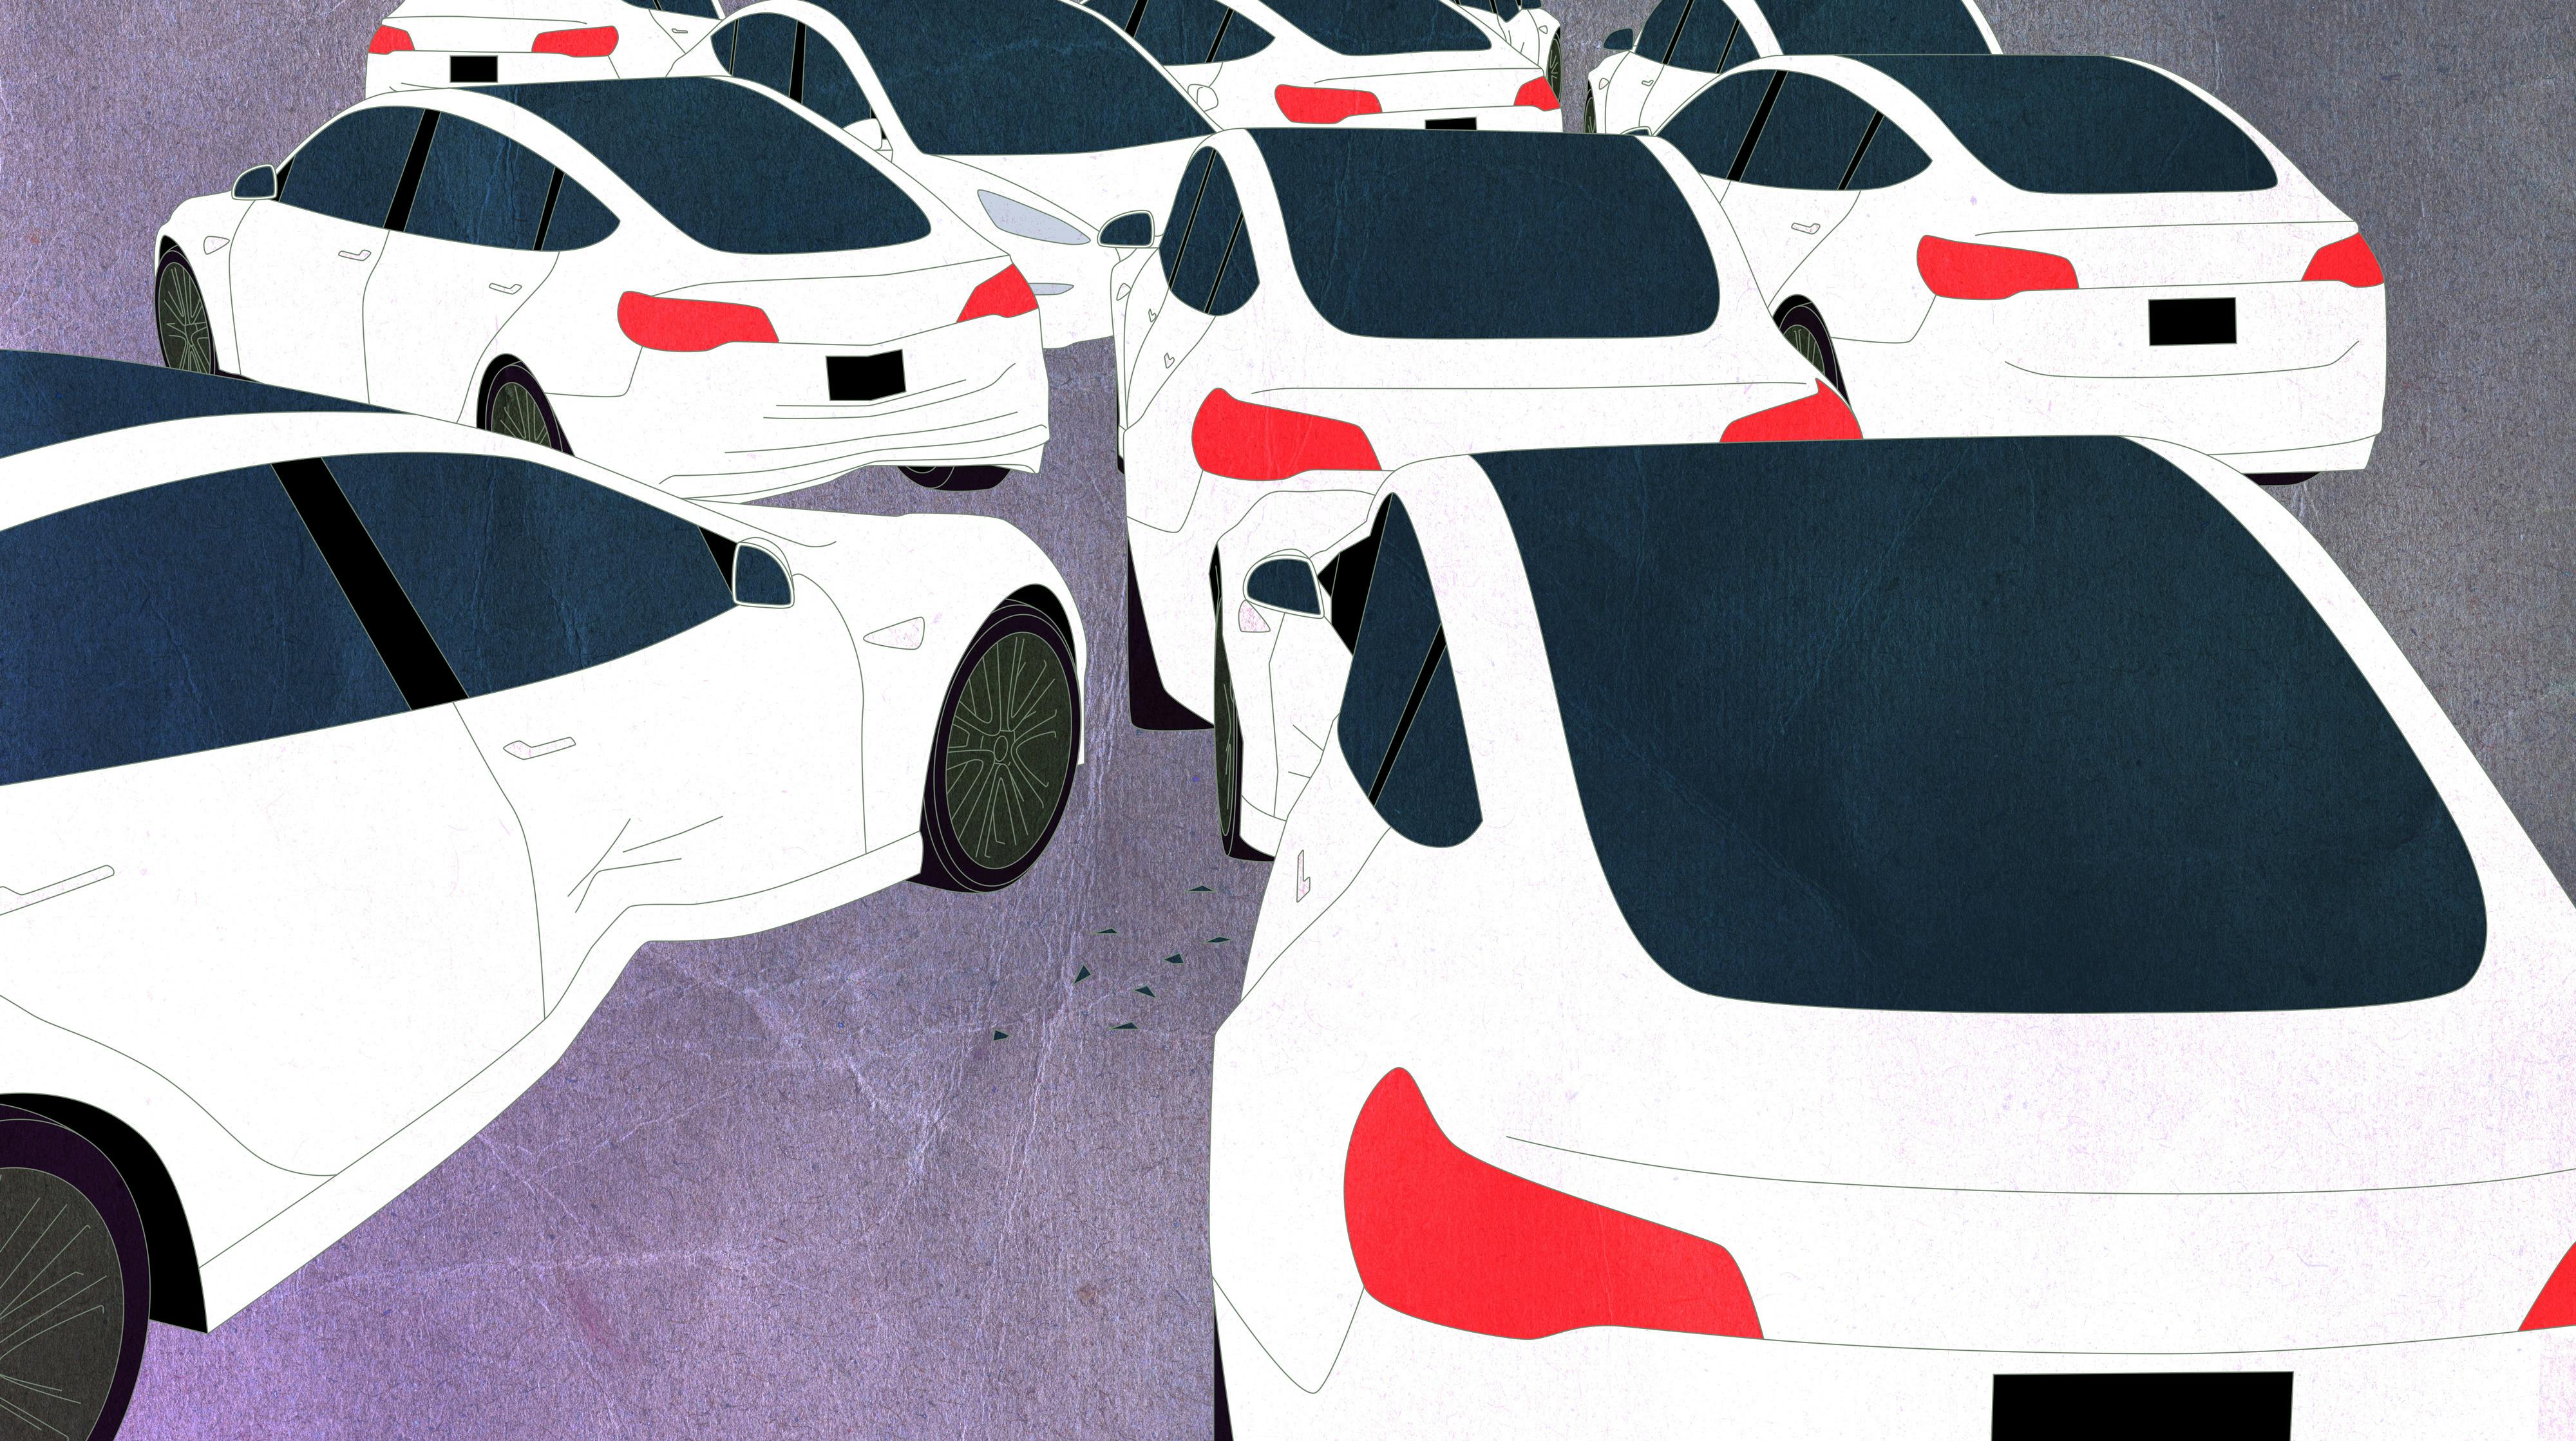 An illustrated drawing of some white Teslas in a pile-up, against a purple background.